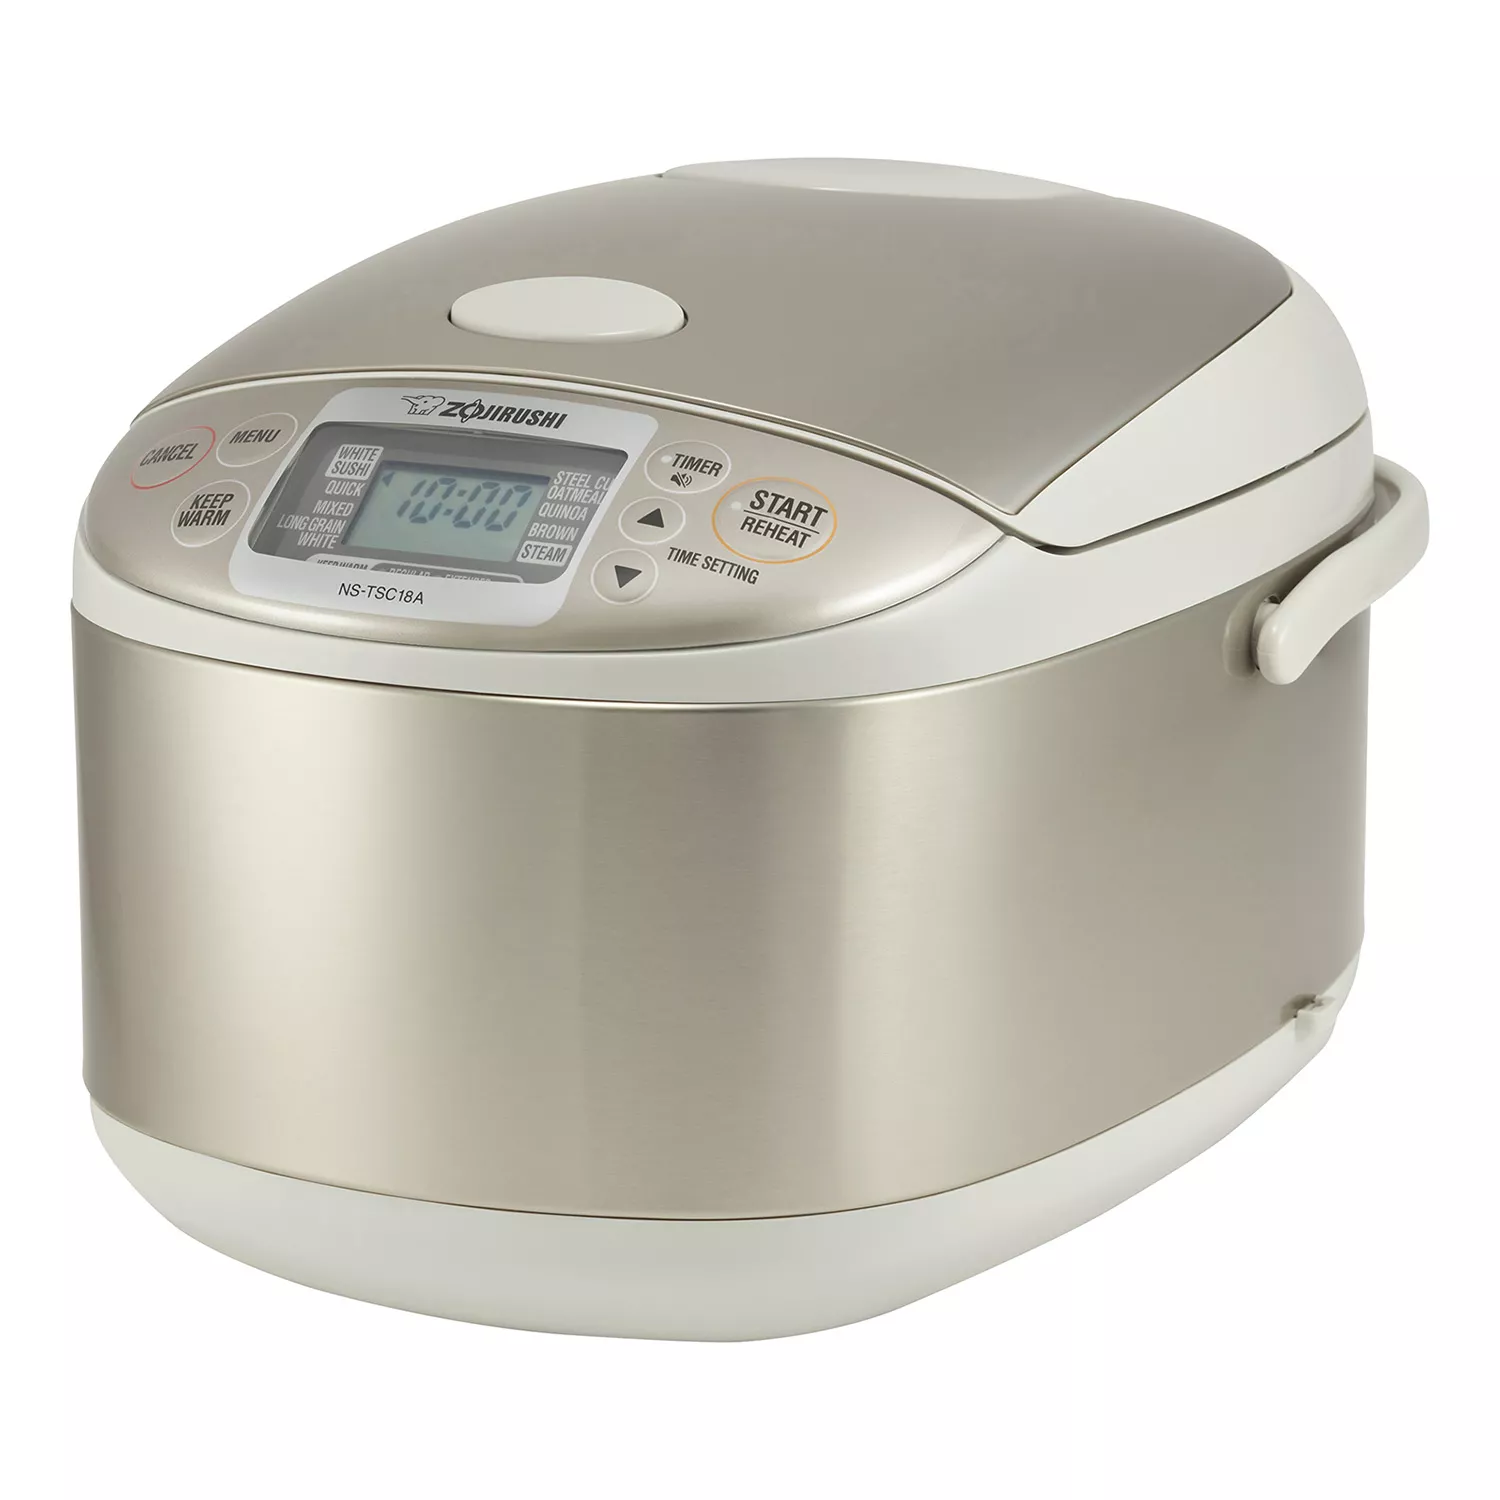 Review DASH MINI Rice Cooker Steamer How To Cook Great Tasting